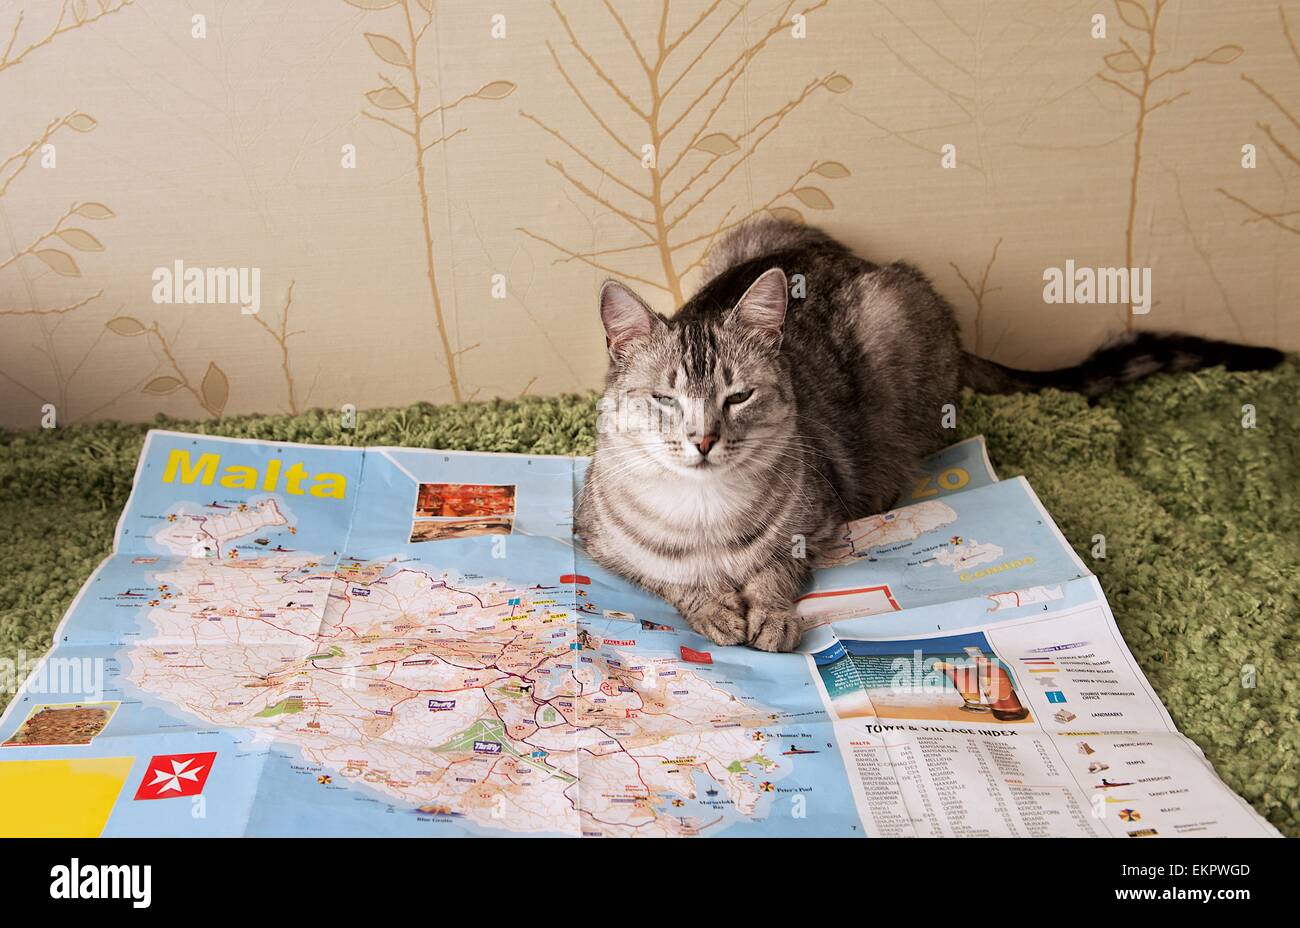 Domestic cat sitting on a map, Malta map and funny cat Stock Photo